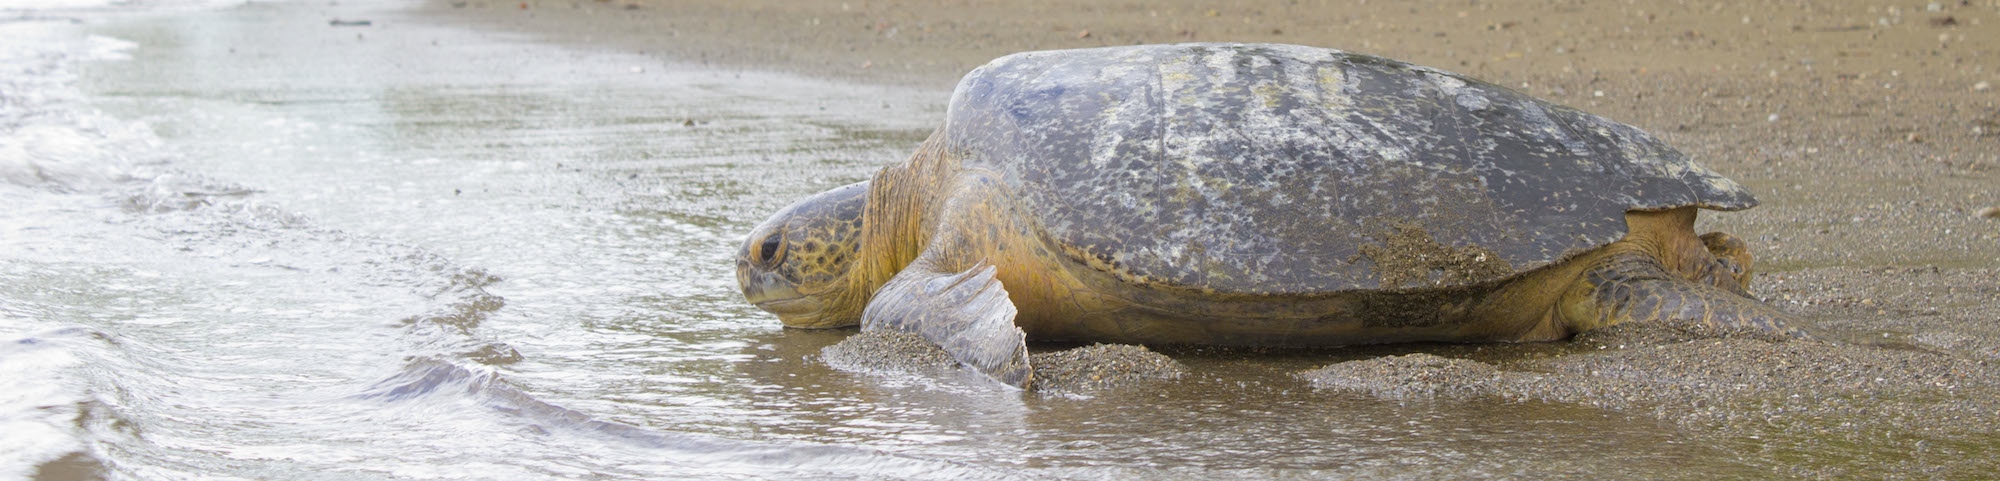 GREEN TURTLE RETURNING TO THE WATER (PHOTO: BRAD NAHILL)